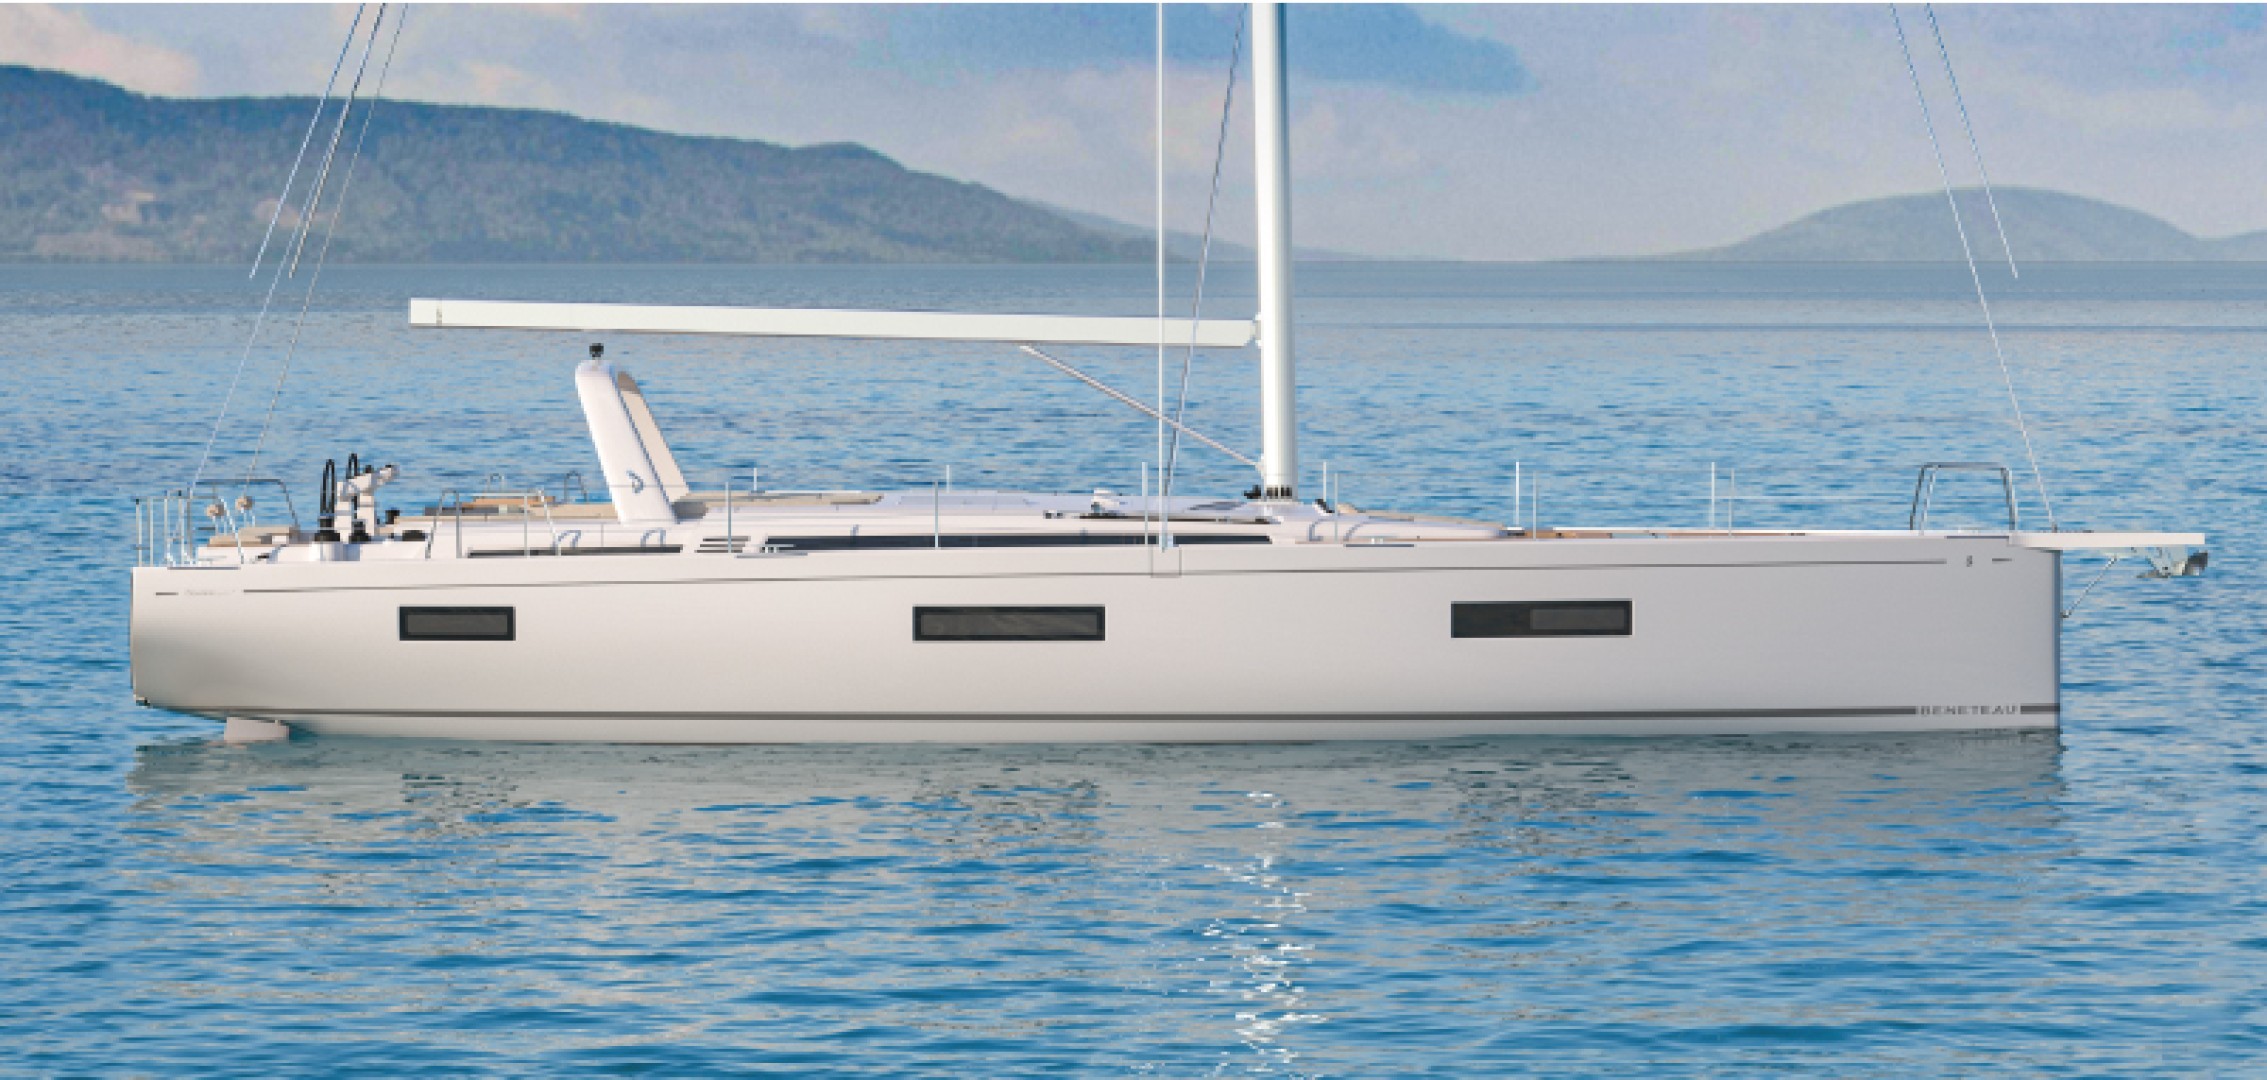 The new Oceanis Yacht 60 flagship